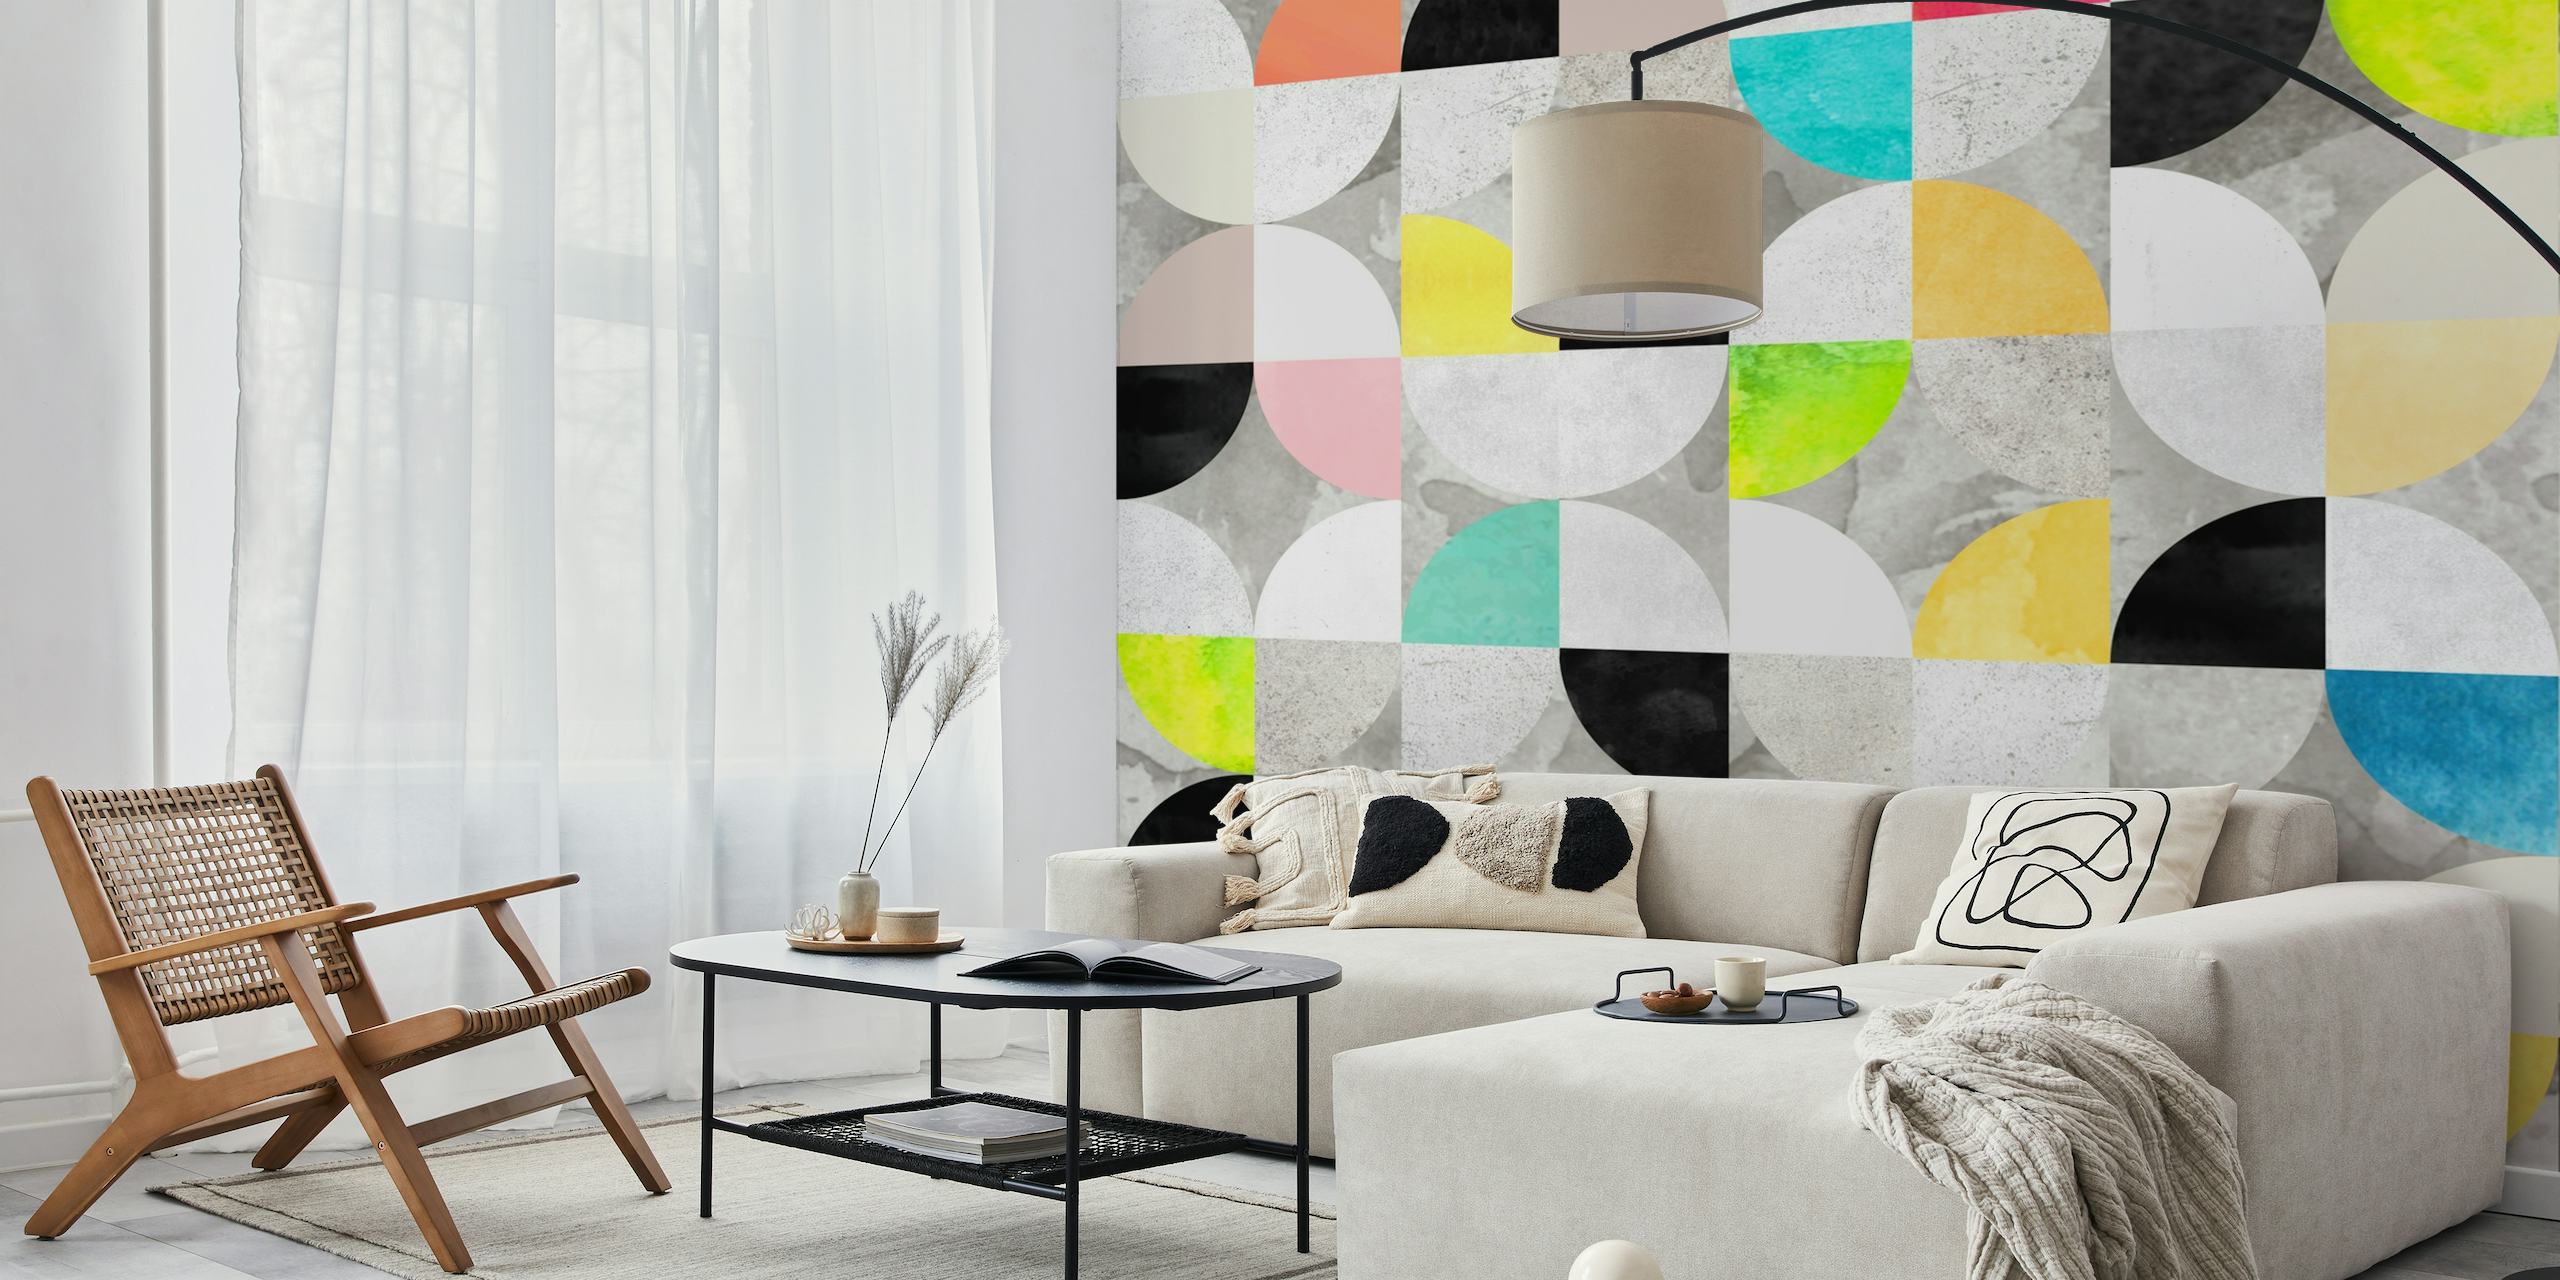 Wallpaper showcasing modern art and design by Happywall